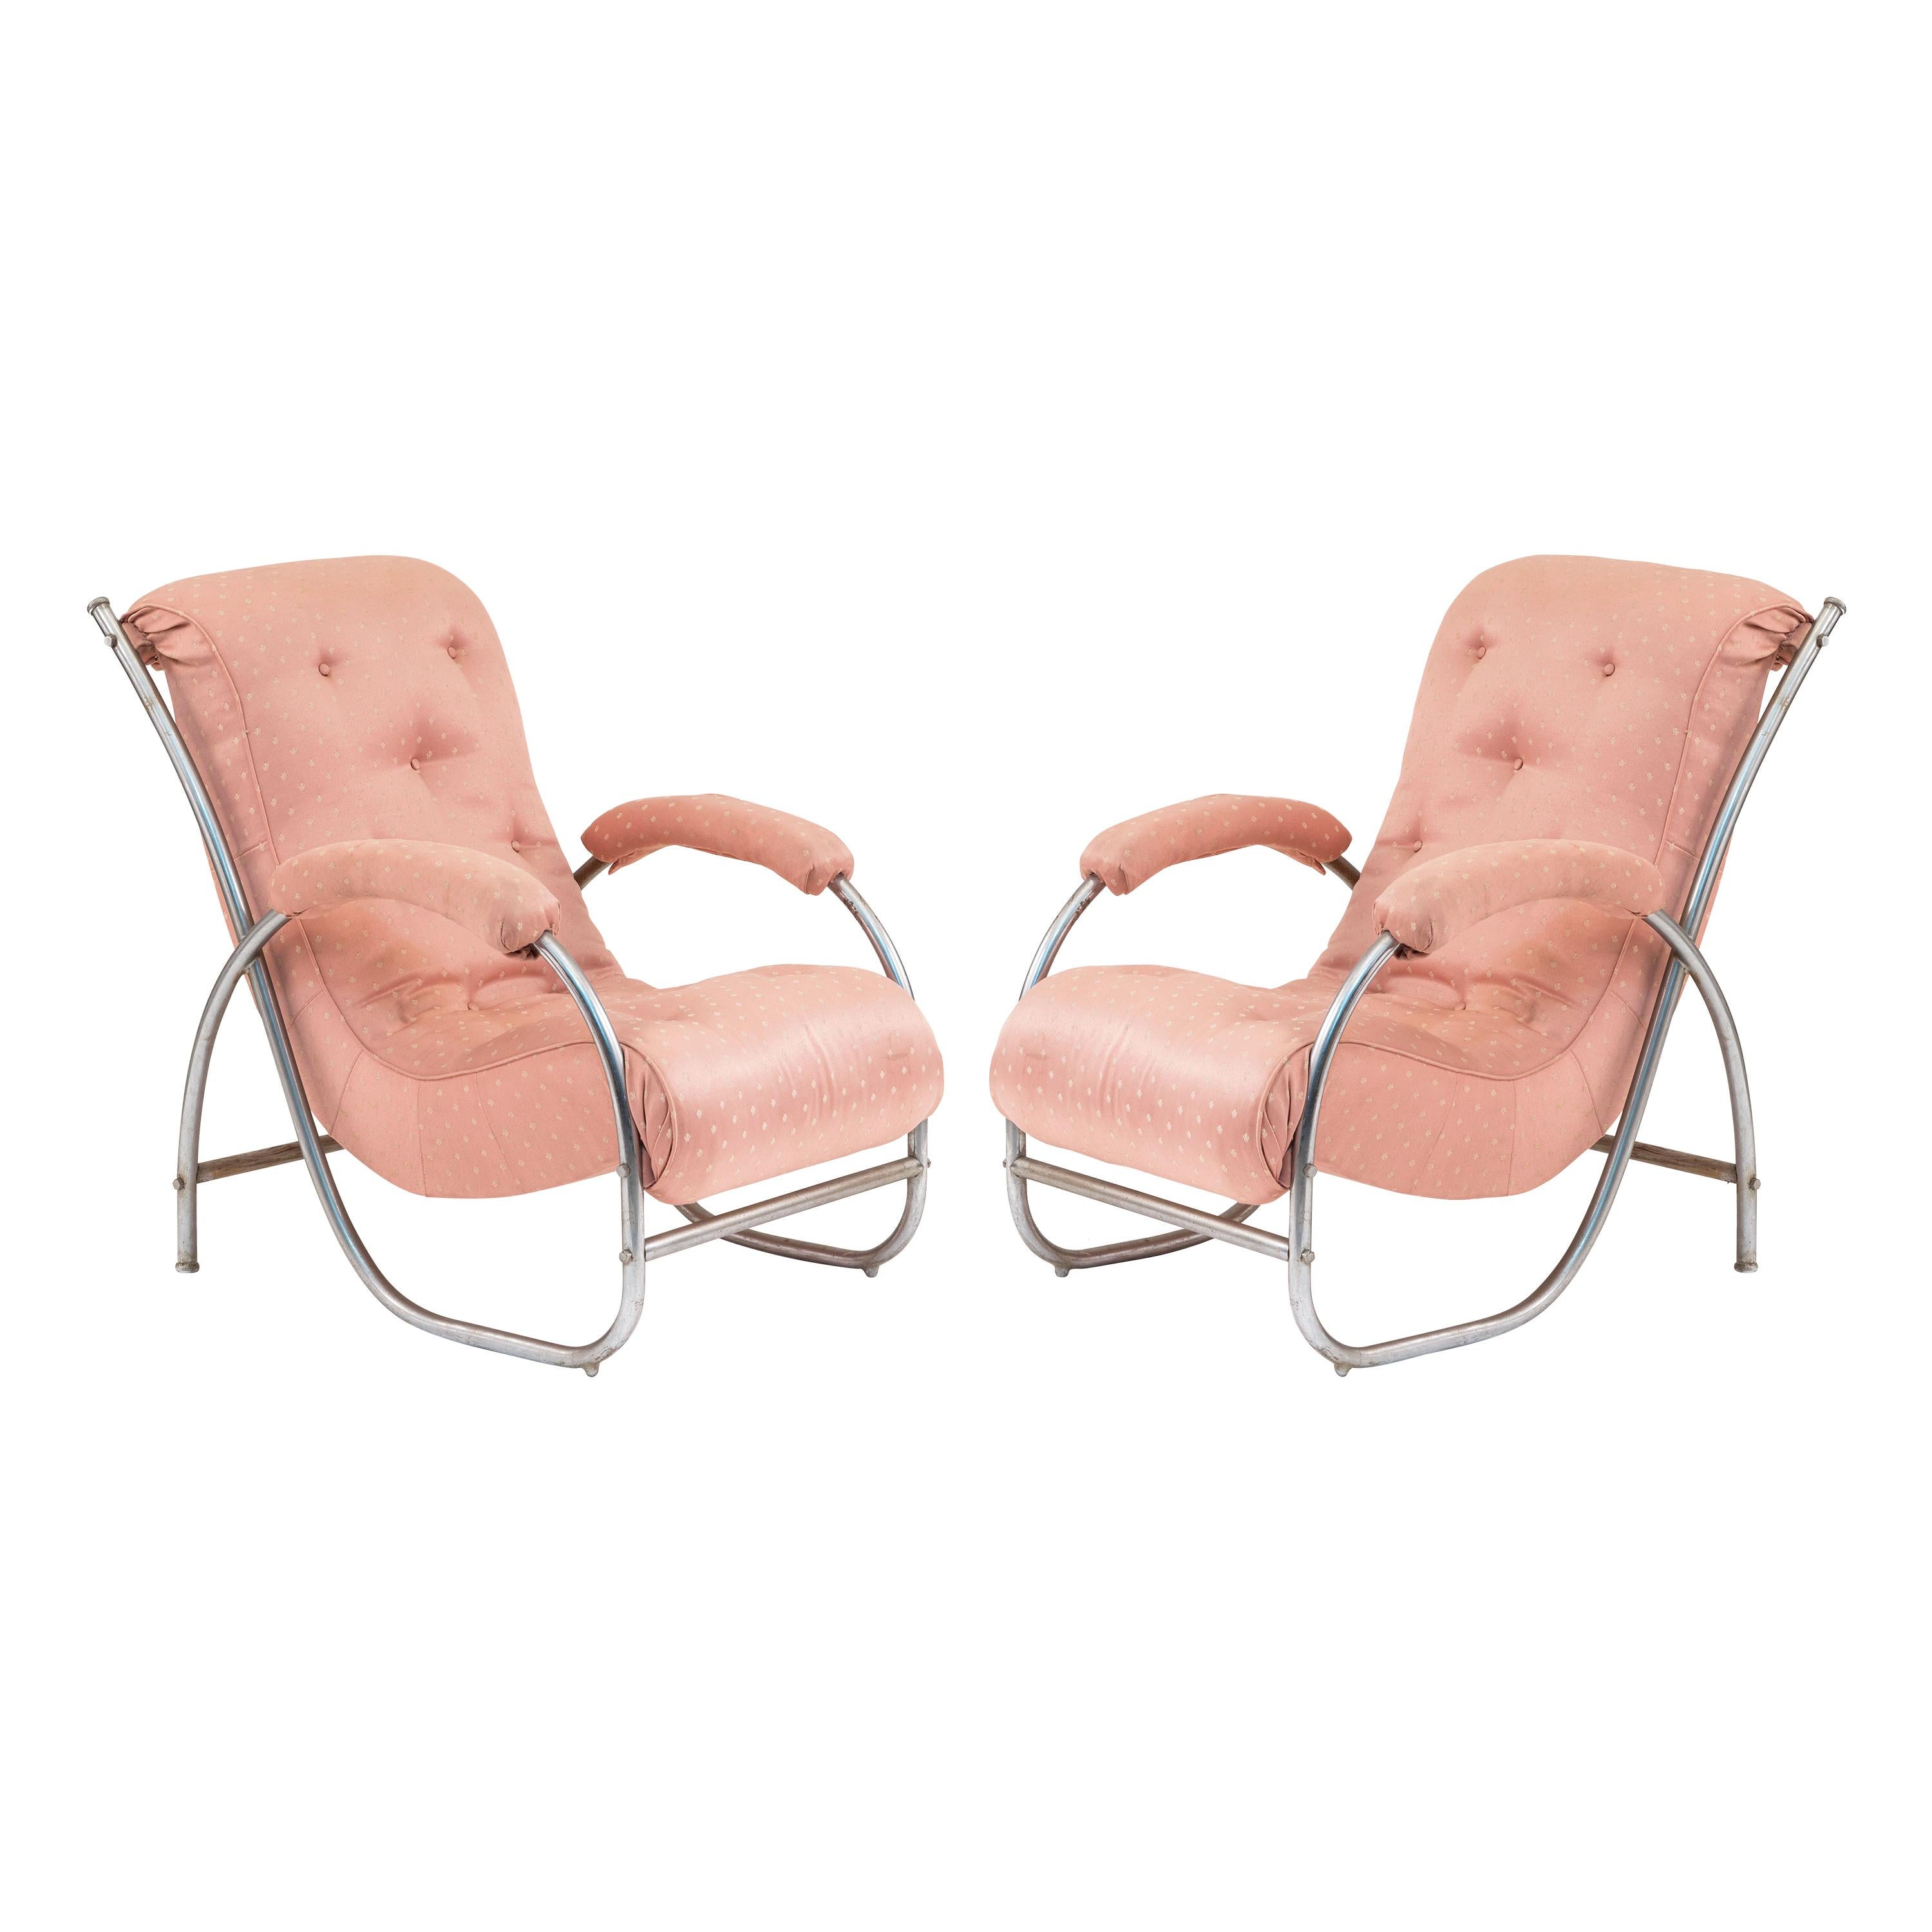 Pair of French Art Deco Tubular Pink Armchairs